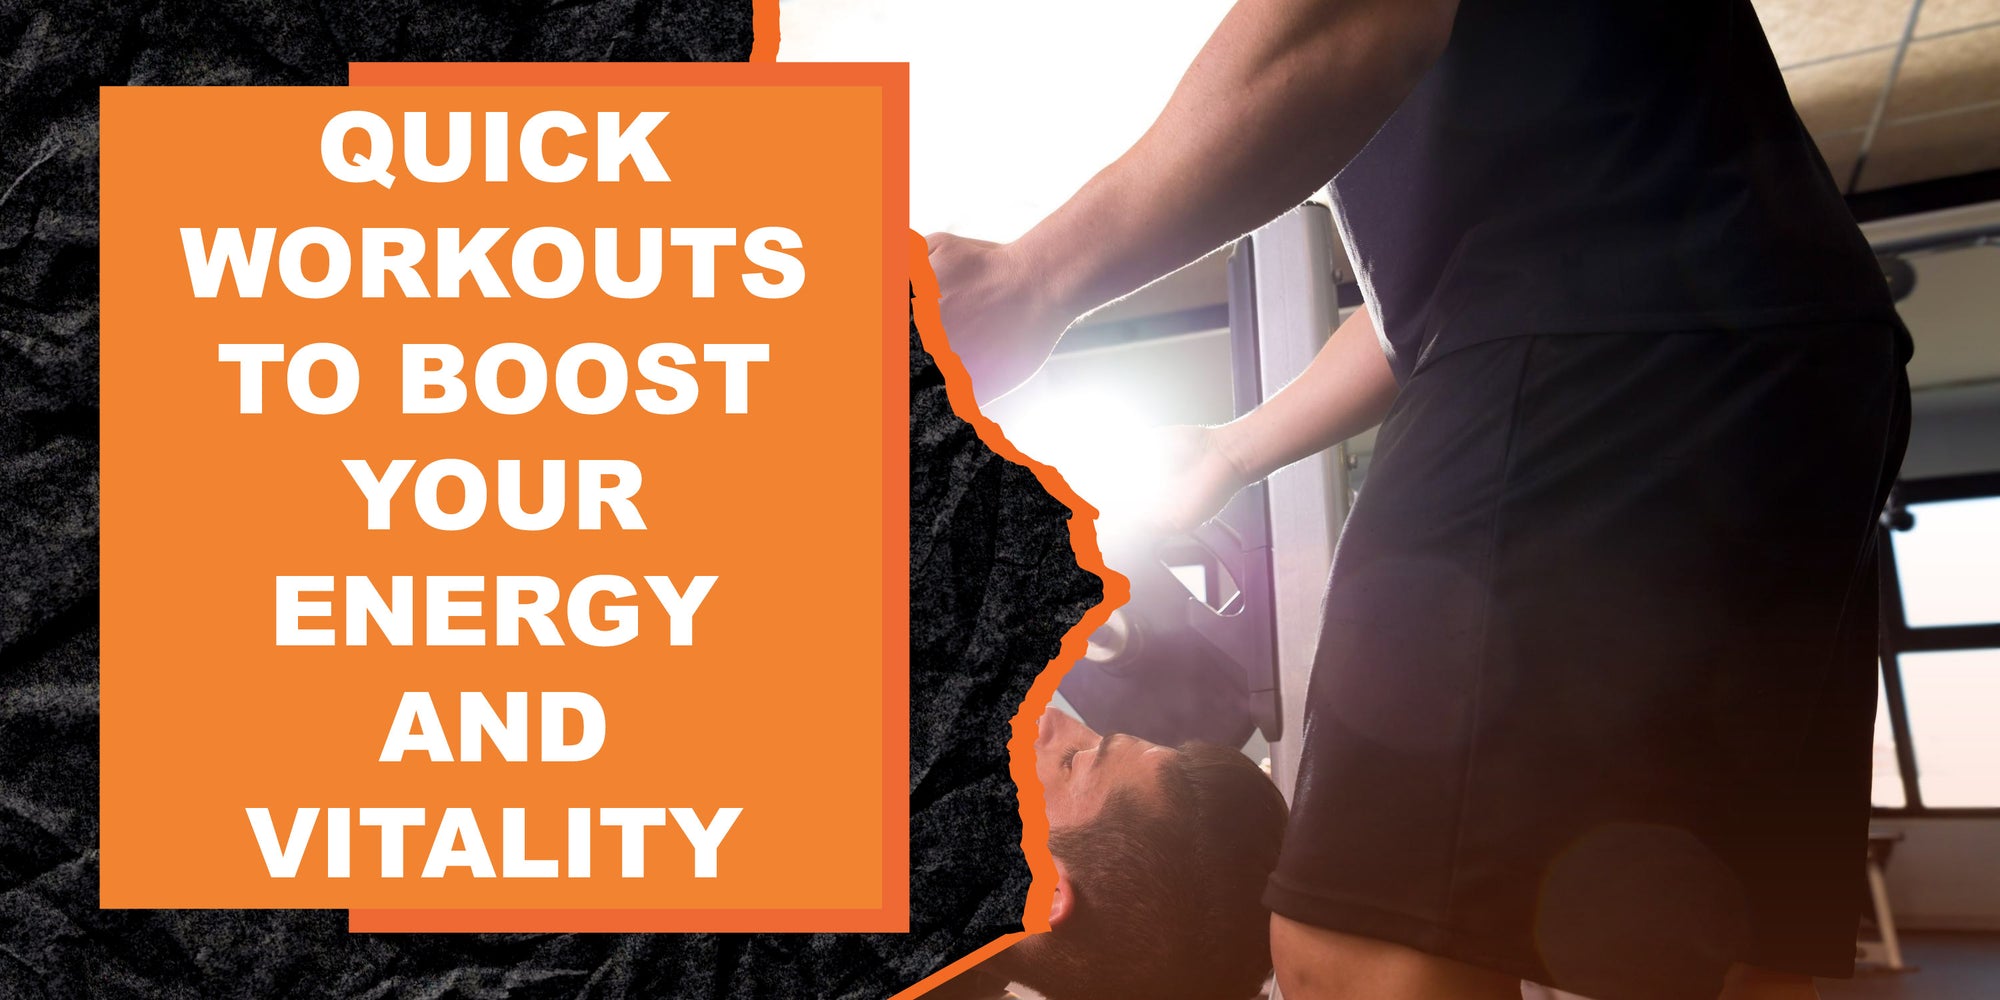 Quick Workouts to Boost Your Energy and Vitality